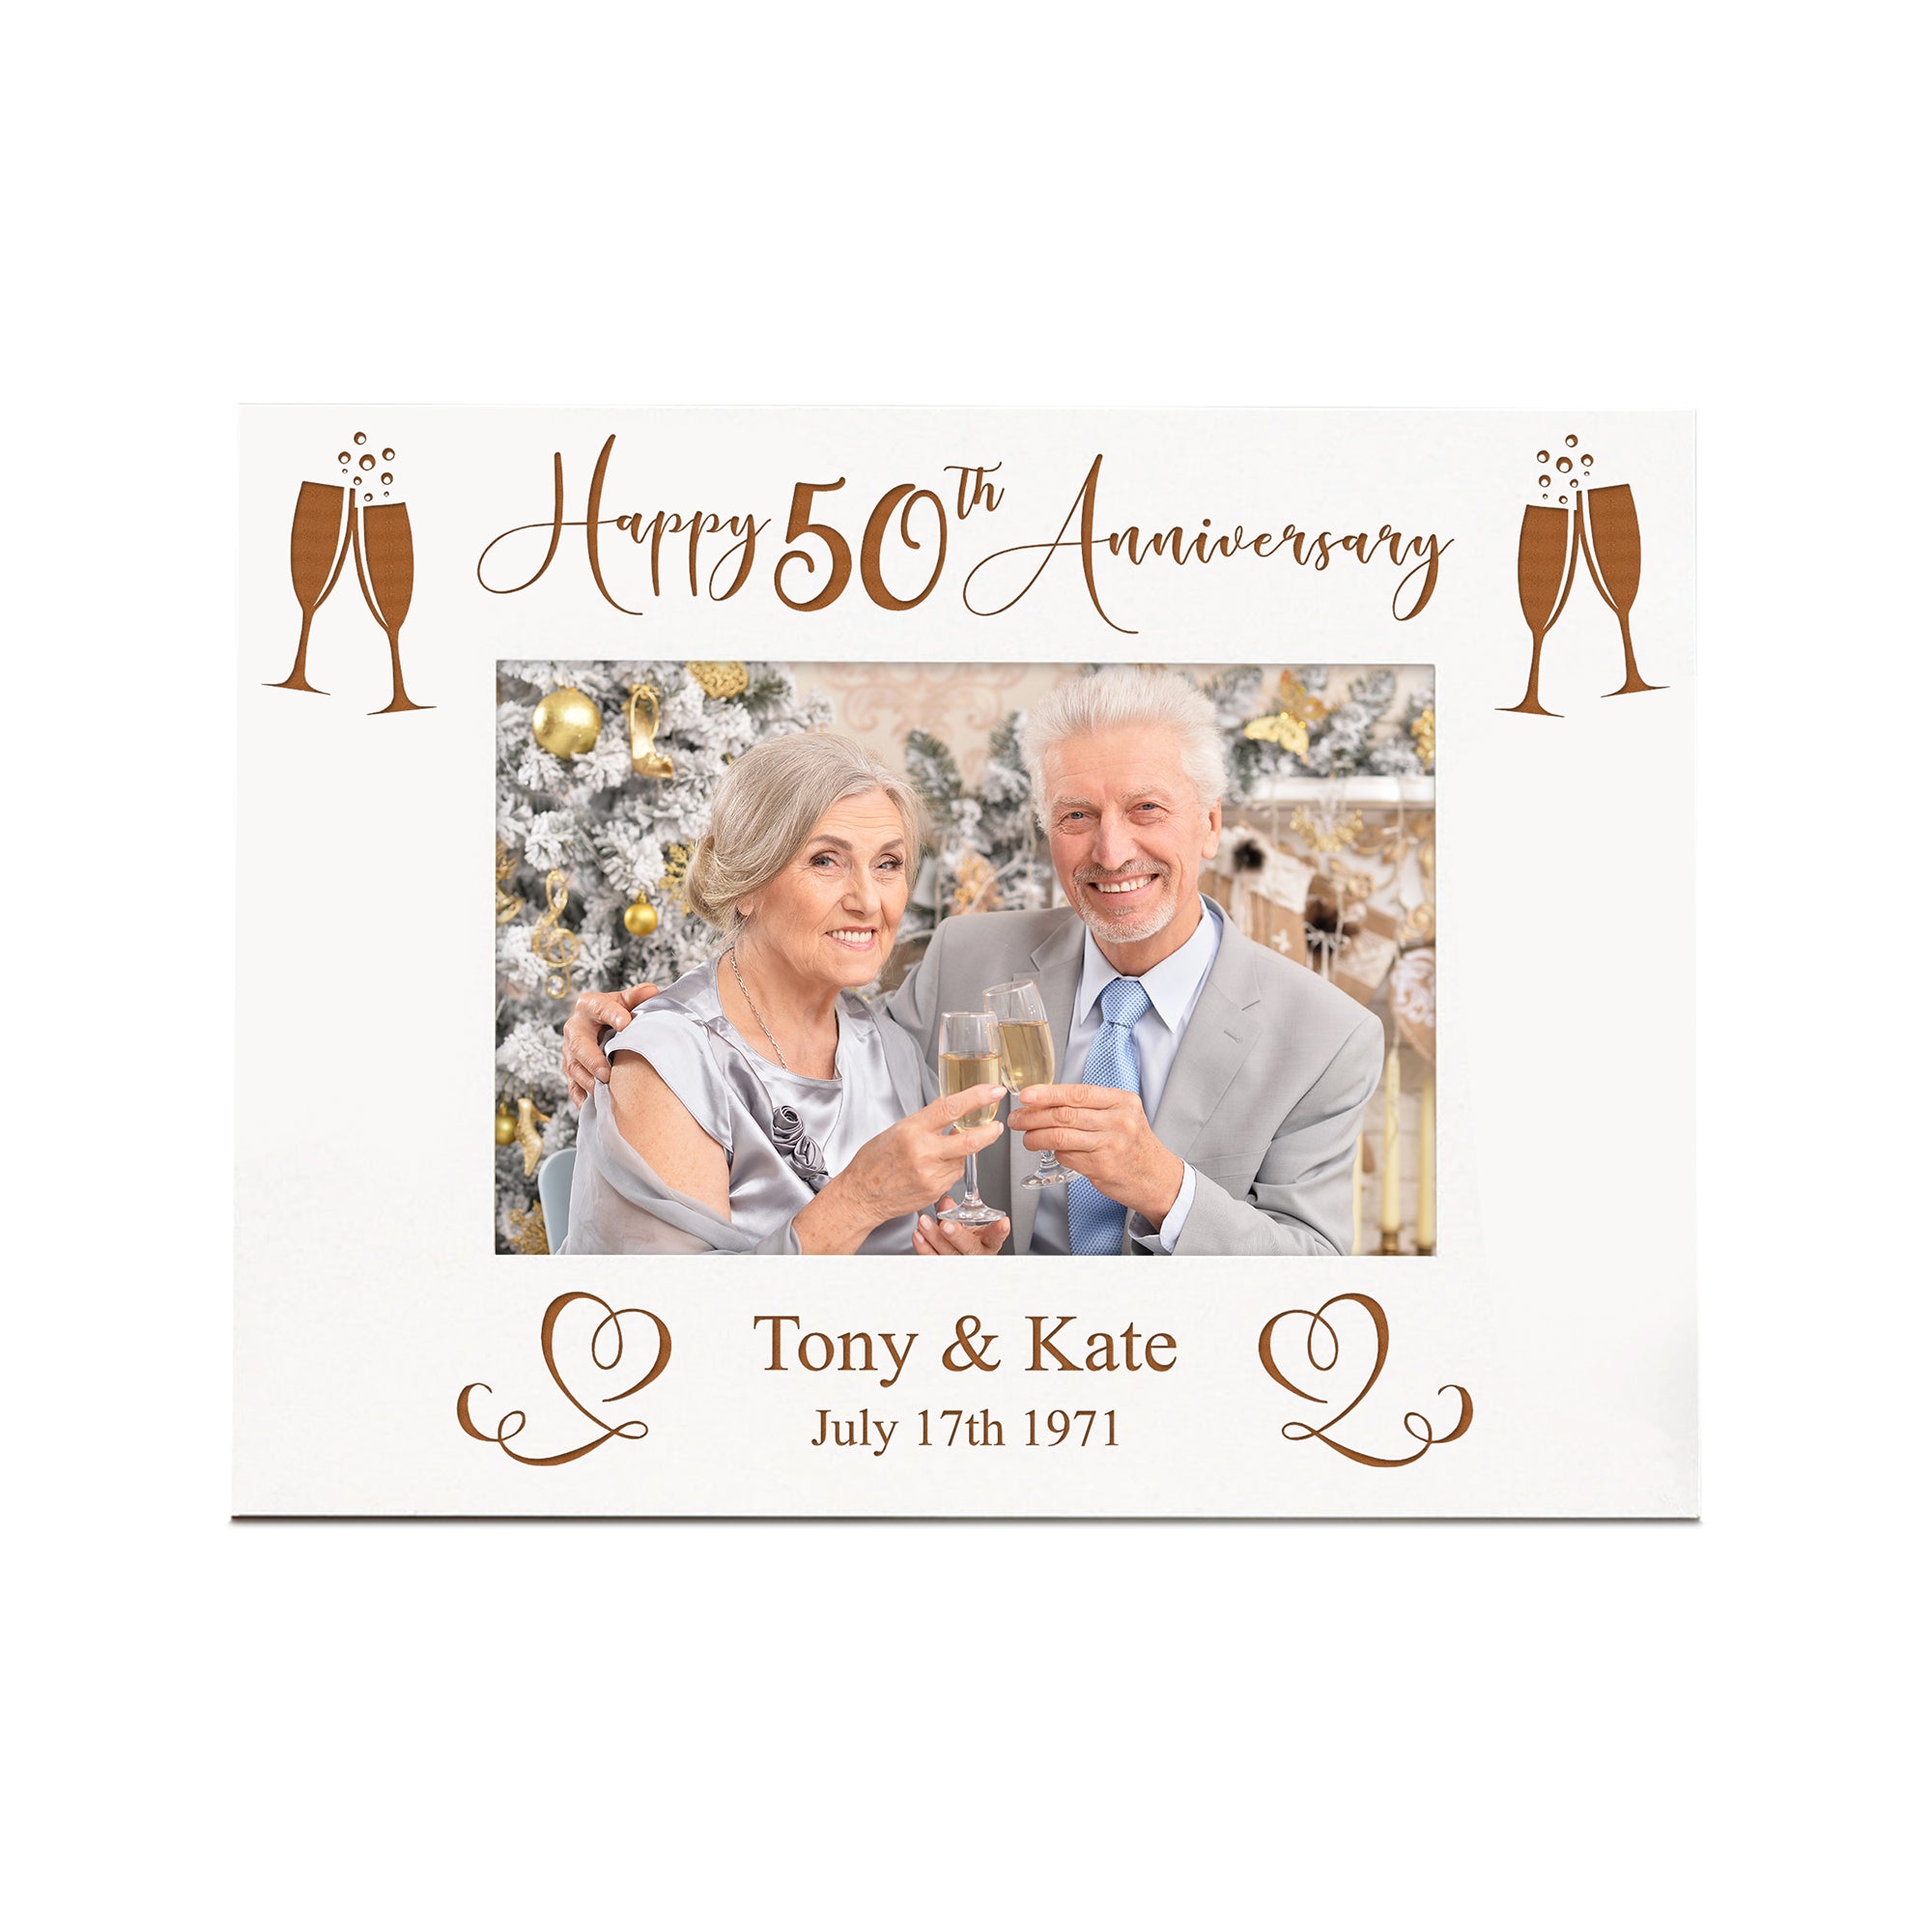 Personalised 50th Anniversary White Wooden Engraved Photo Frame Gift